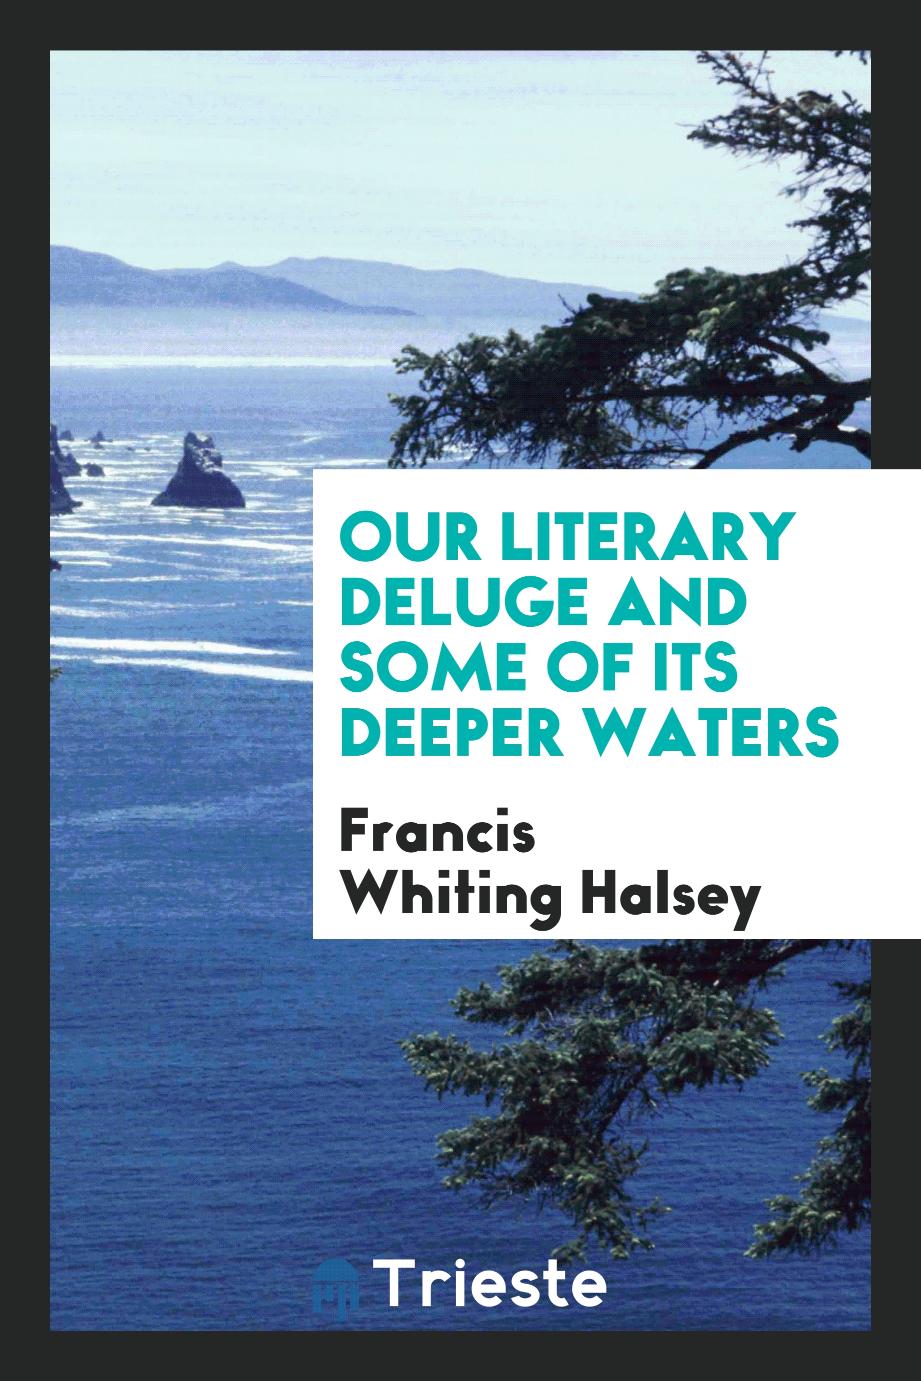 Our literary deluge and some of its deeper waters